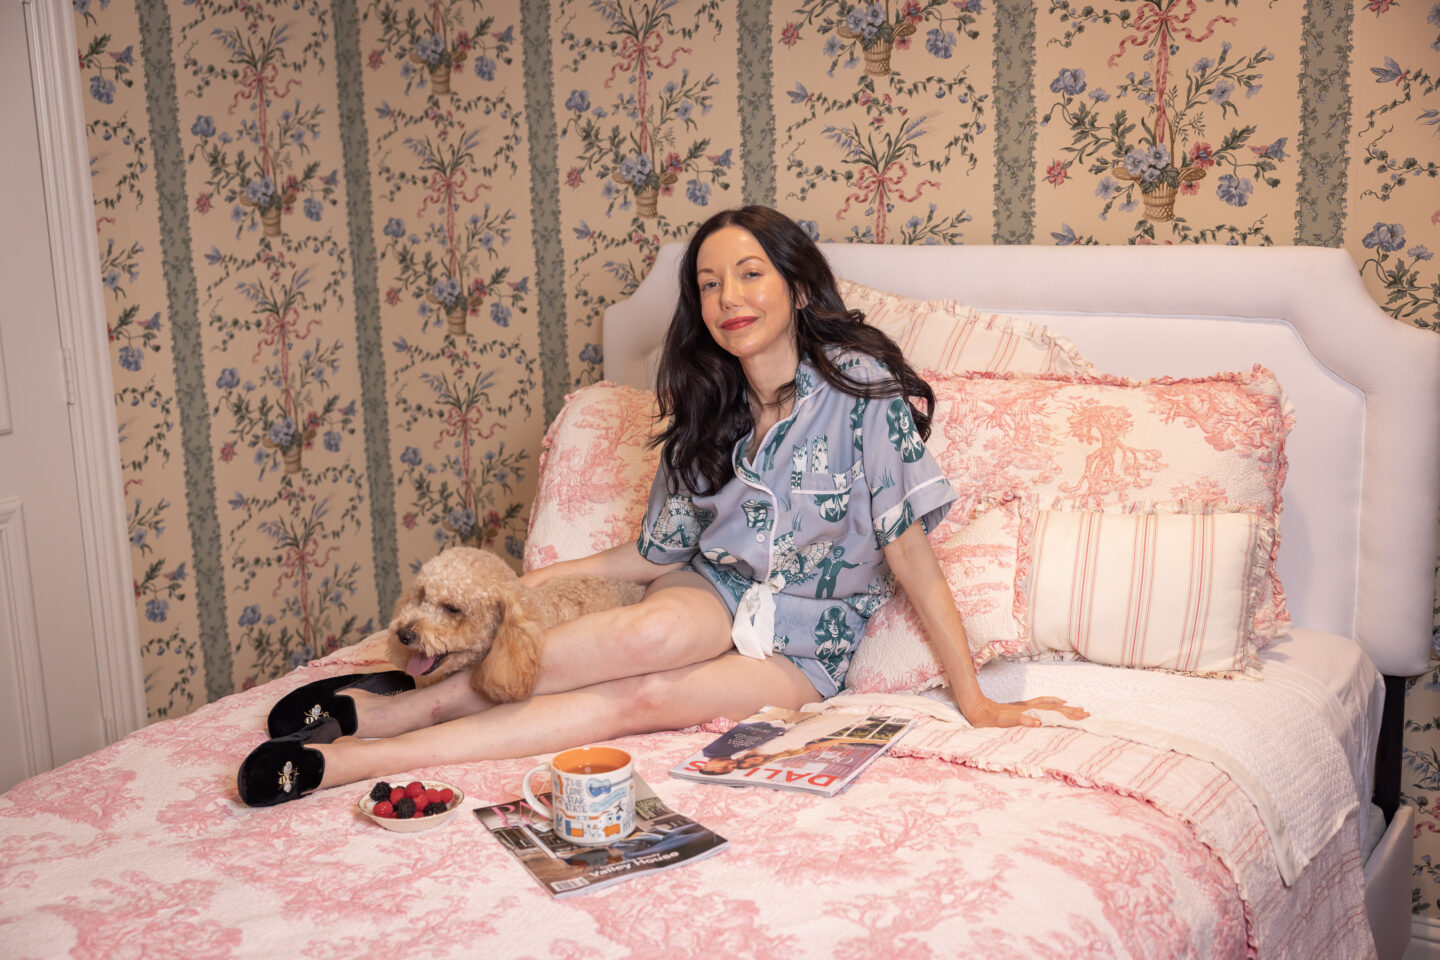 Dallas Lifestyle Blogger, Home Interiors, Guest Bedroom, Traditional Home Decor, Cottage Core, Grandmillennial Style, Floral Wallpaper, LoveShackFancy, Luxury Home, Katie Kime Pajamas, Toile Bedding, Patricia Green Slippers, Mini Goldendoodle Puppy